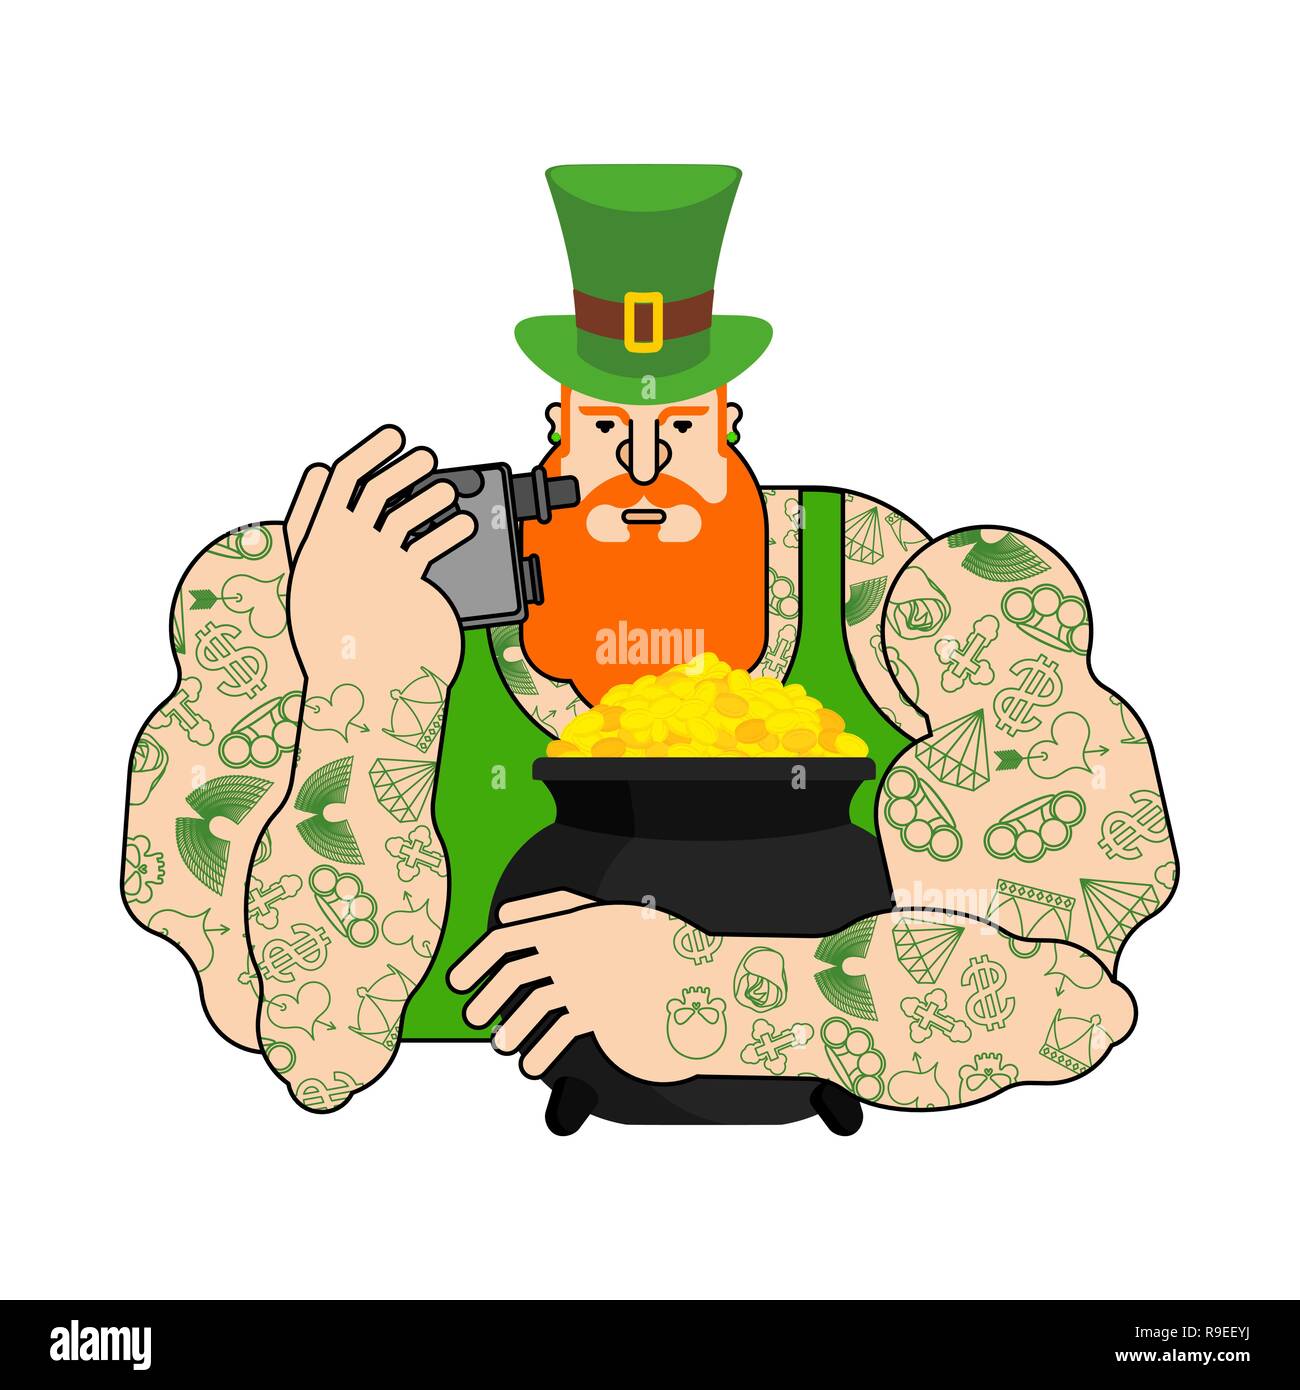 915 St Patricks Day Tattoo Images Stock Photos  Vectors  Shutterstock